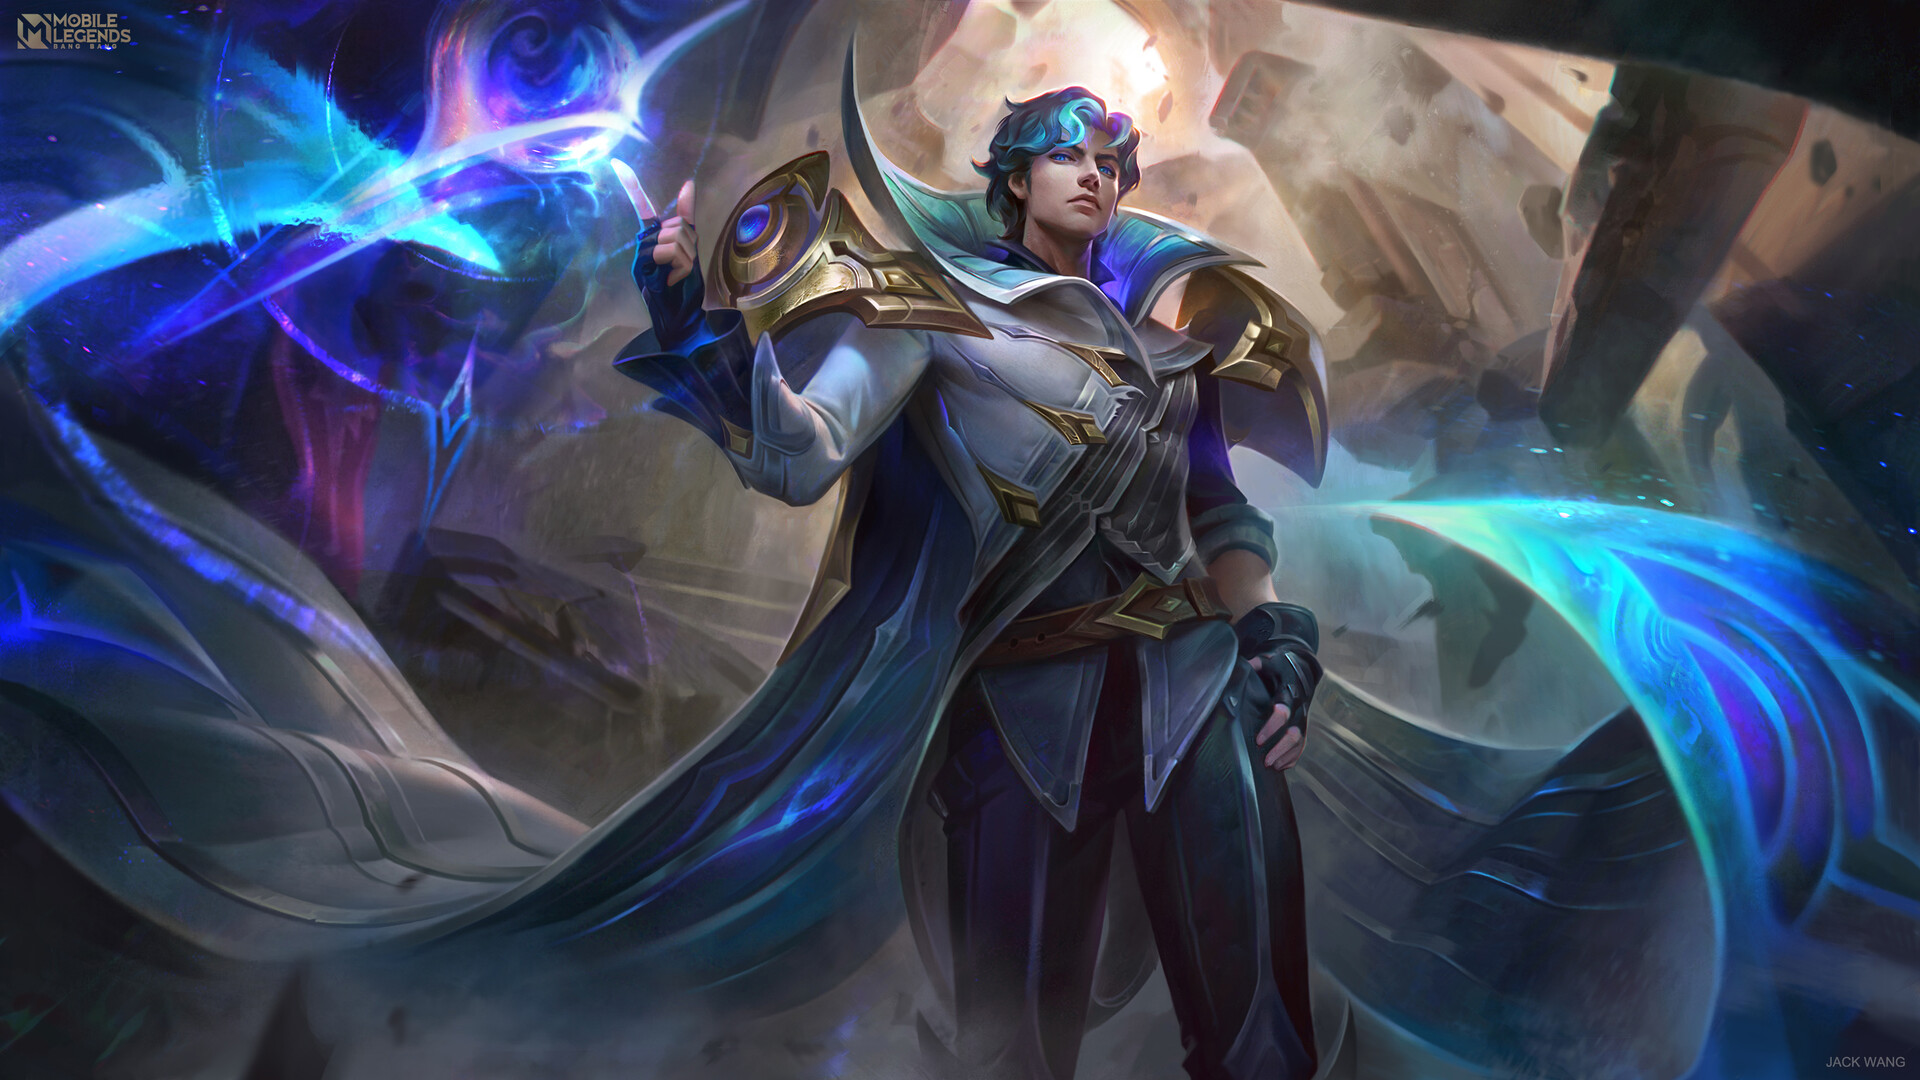 Jack Wang Drawing Men Magician Blue Hair Blue Eyes Shoulder Pads White Clothing Gloves Spell Blue Fa 1920x1080